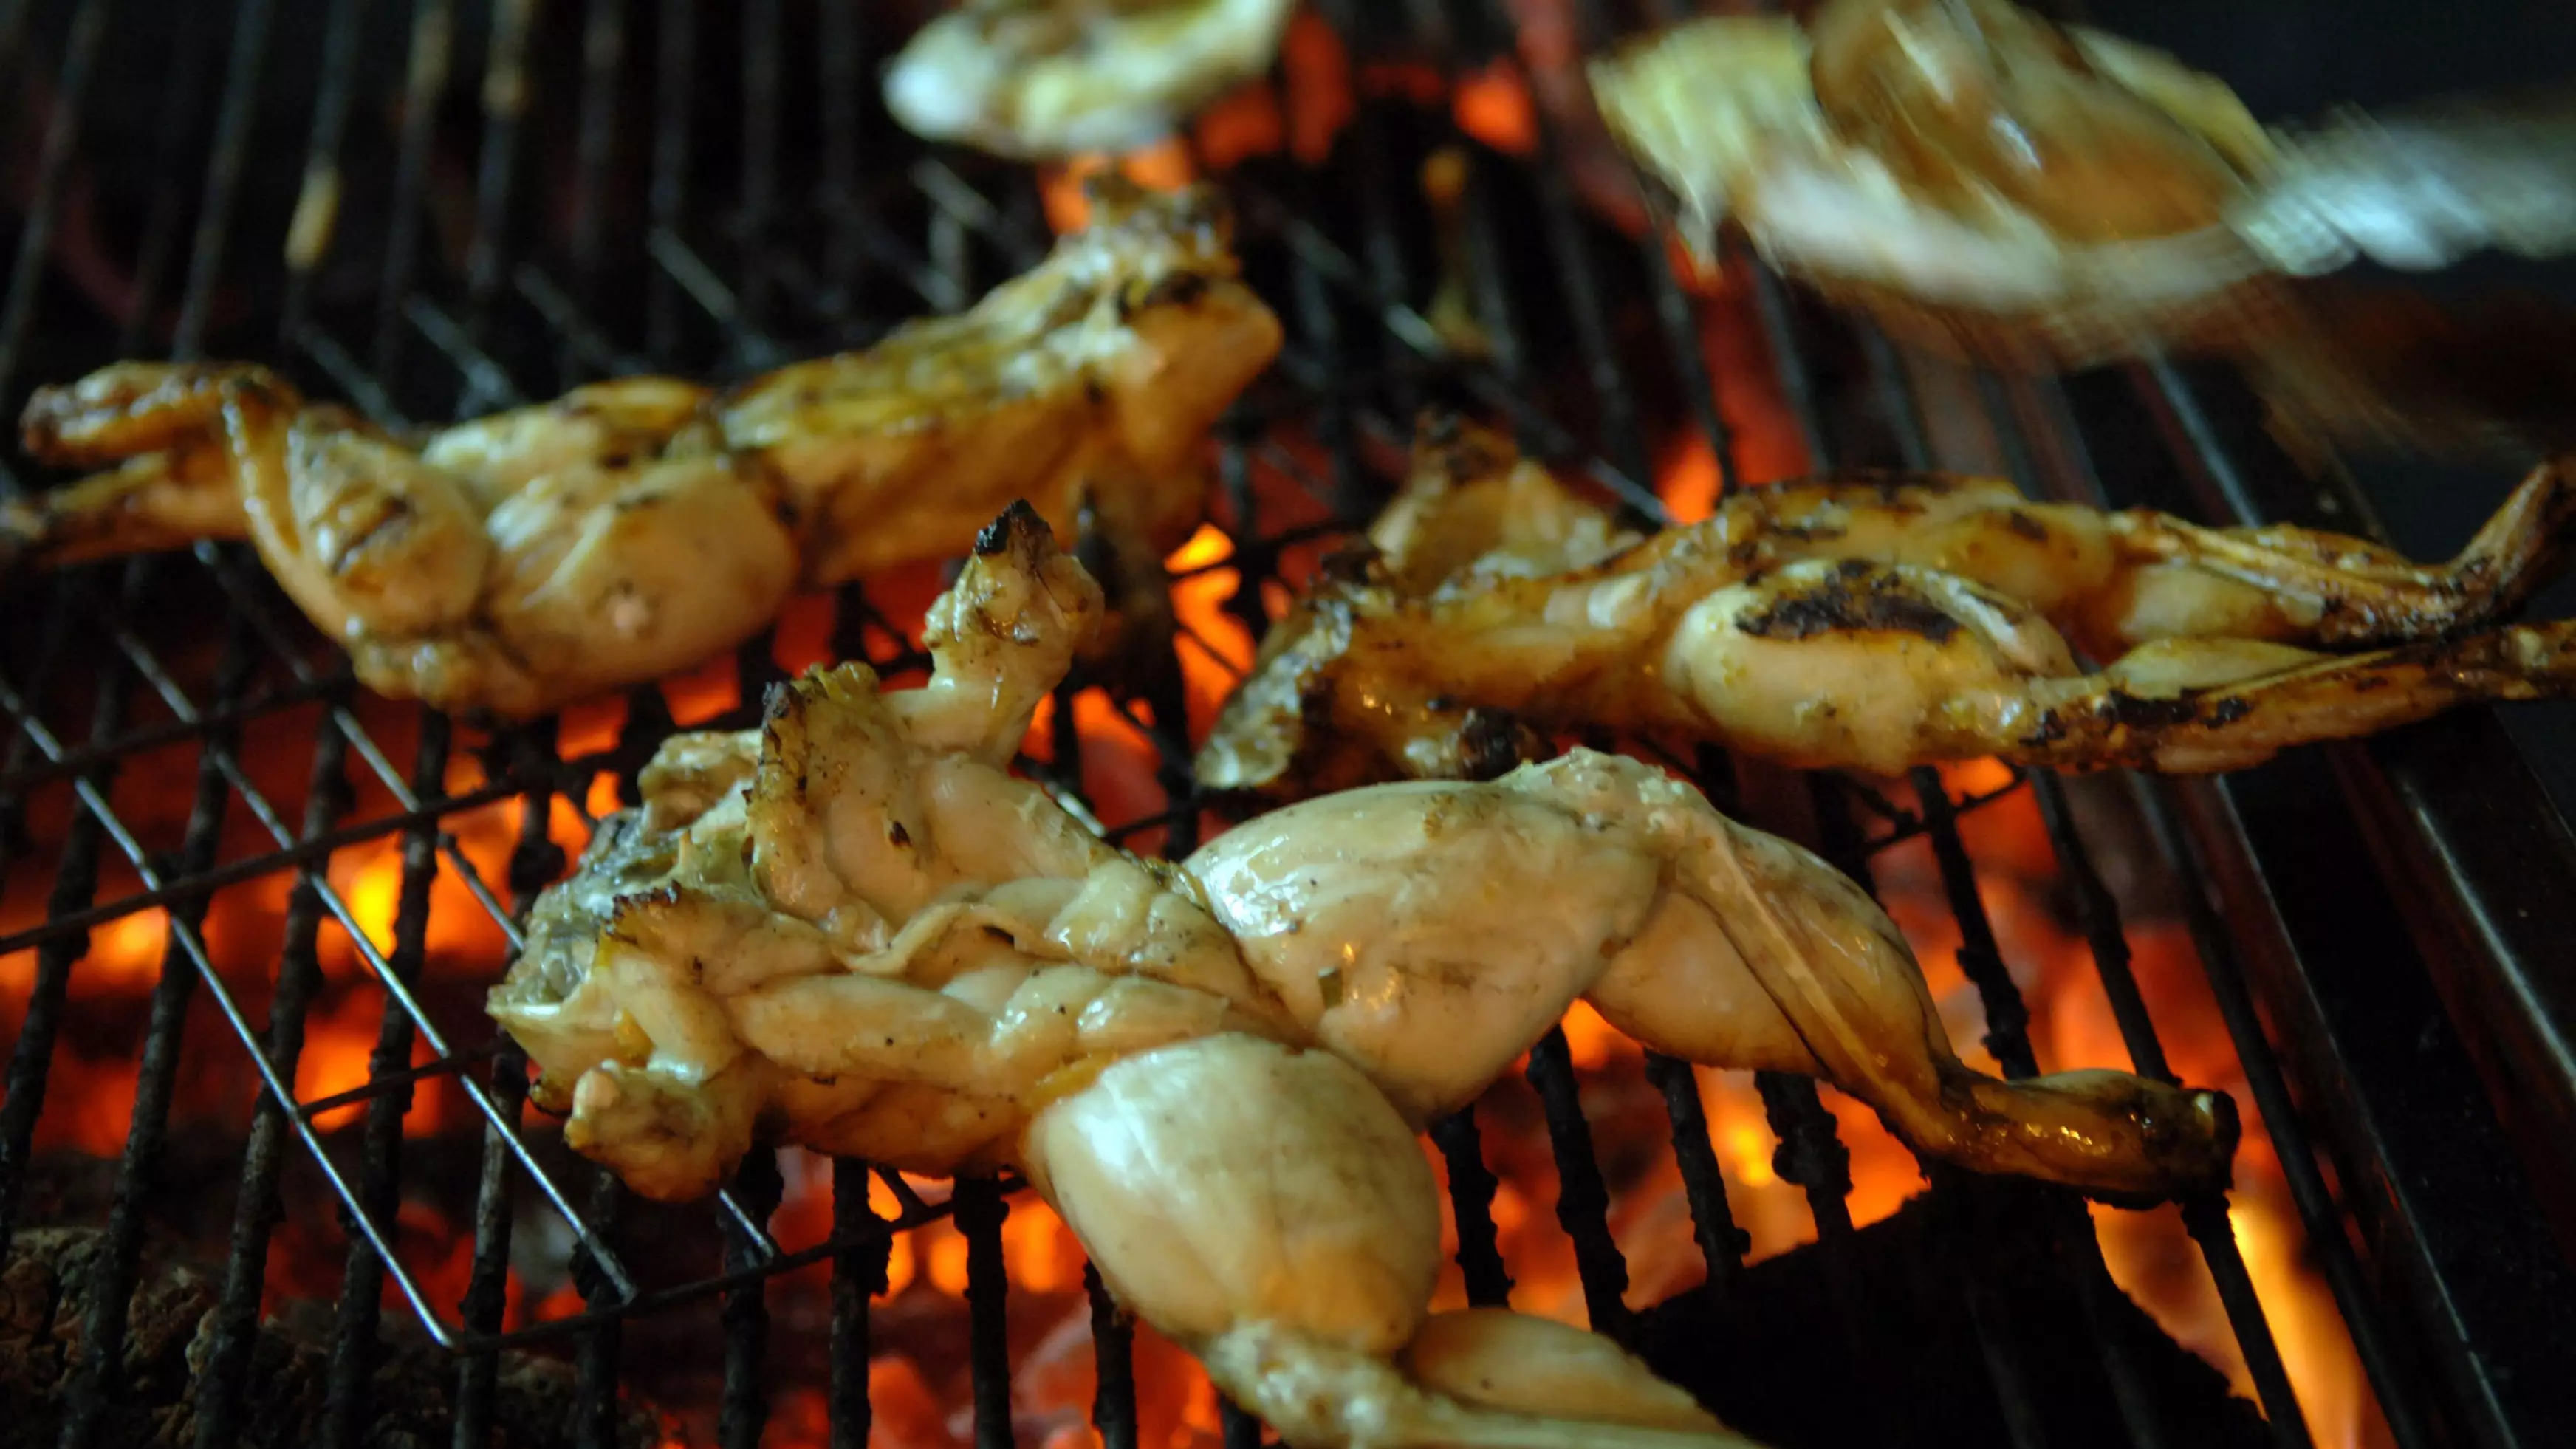 11 People Hospitalised For Carbon Monoxide Poisoning After Using Open Grill BBQ Inside Home